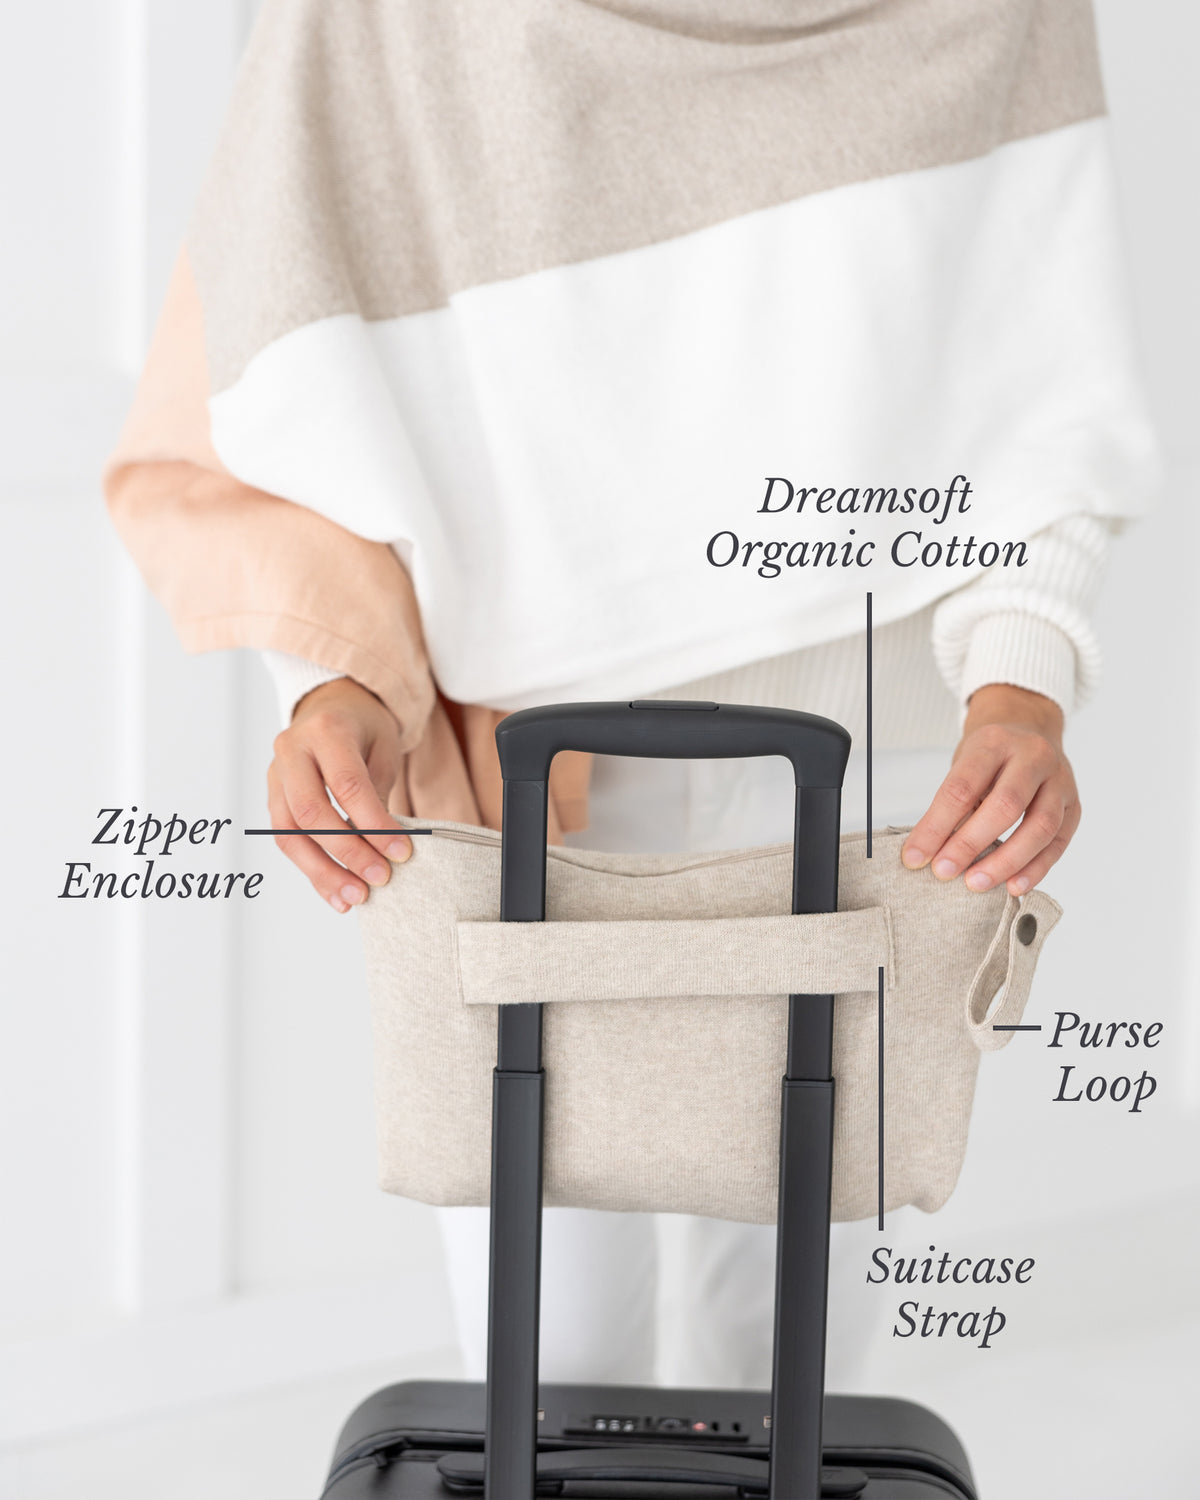 Woman placed Birch Carry Pouch which is a beige zipper pouch that can hold the Dreamsoft Travel Scarf over handle on suitcase